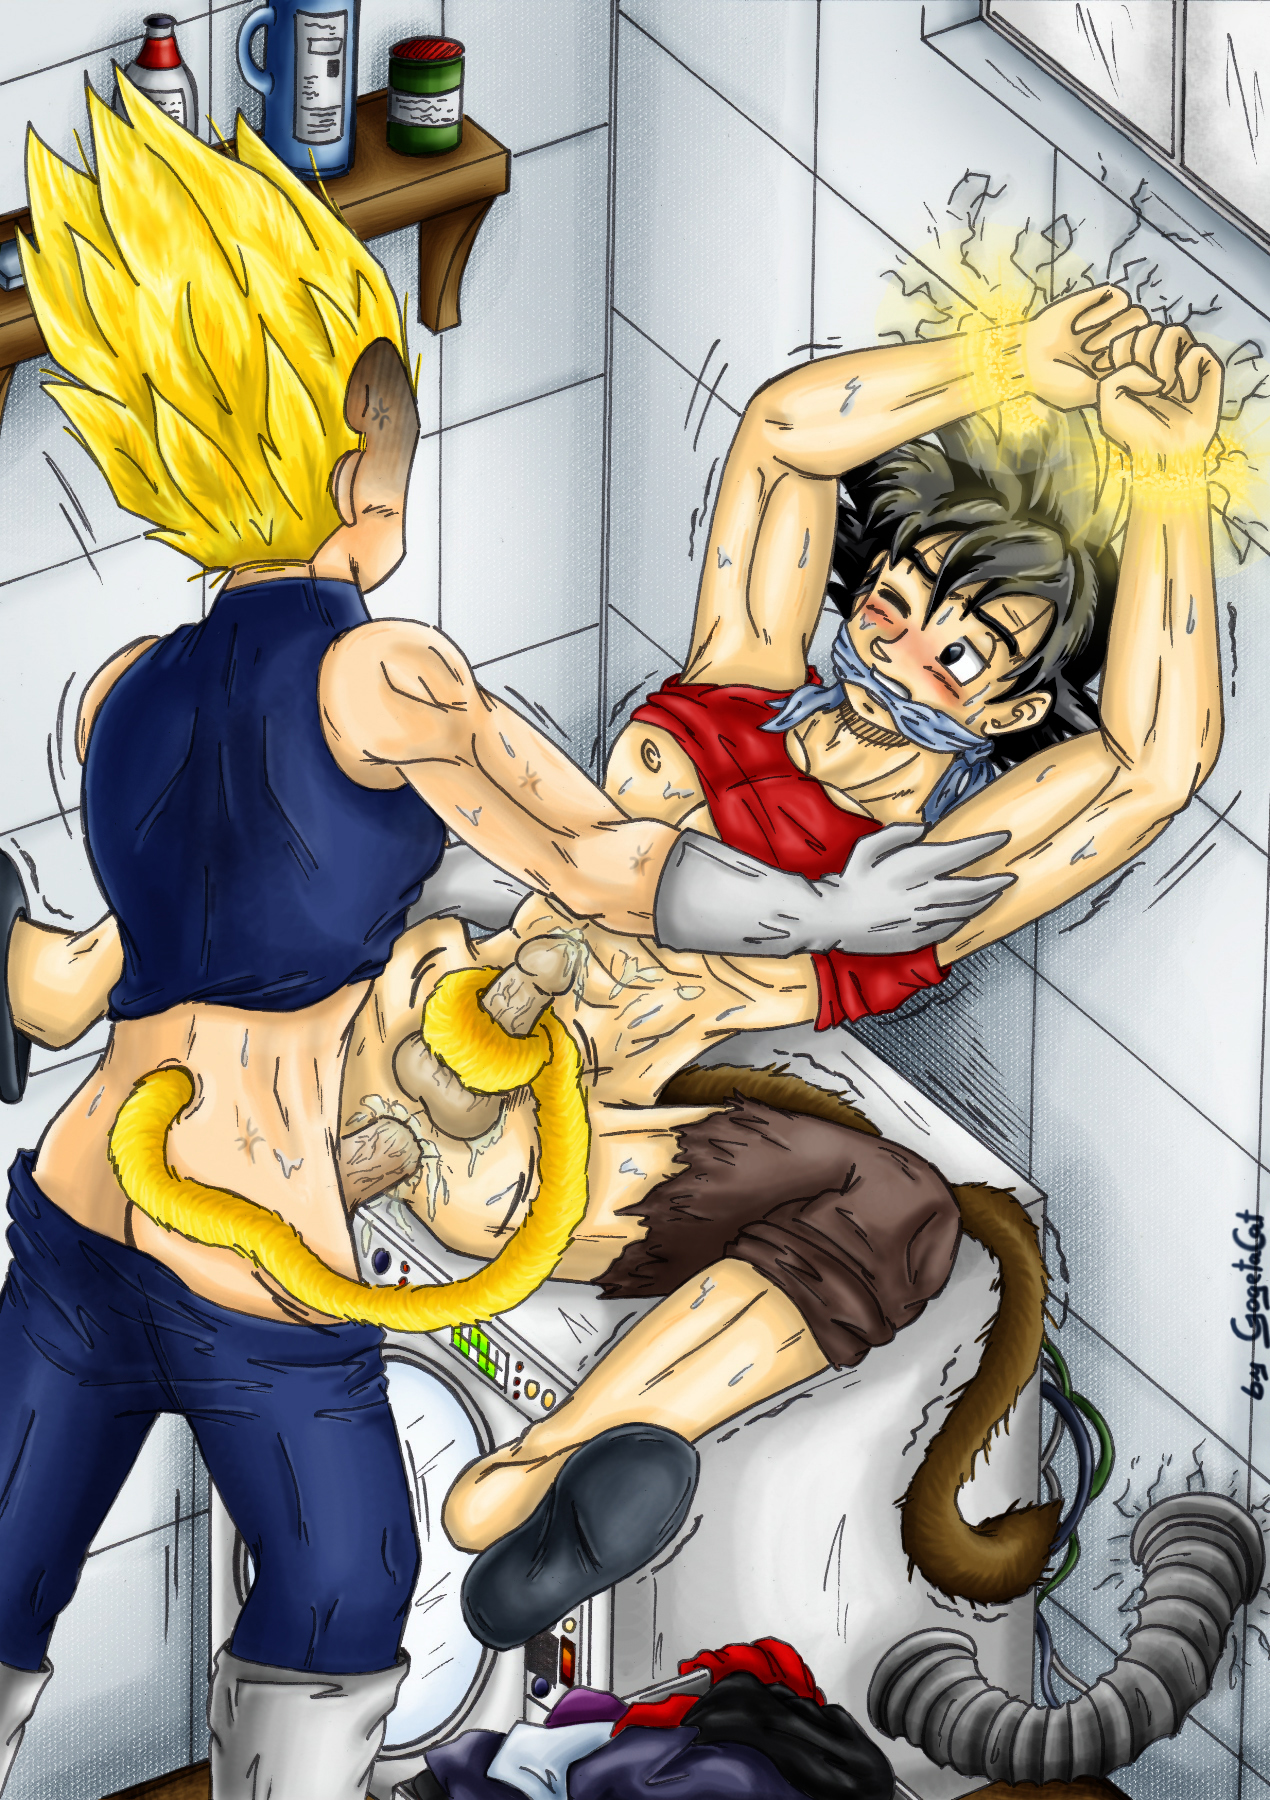 1270px x 1800px - Dbz sex pic. DragonBall Hentai Pictures. 2019-06-20